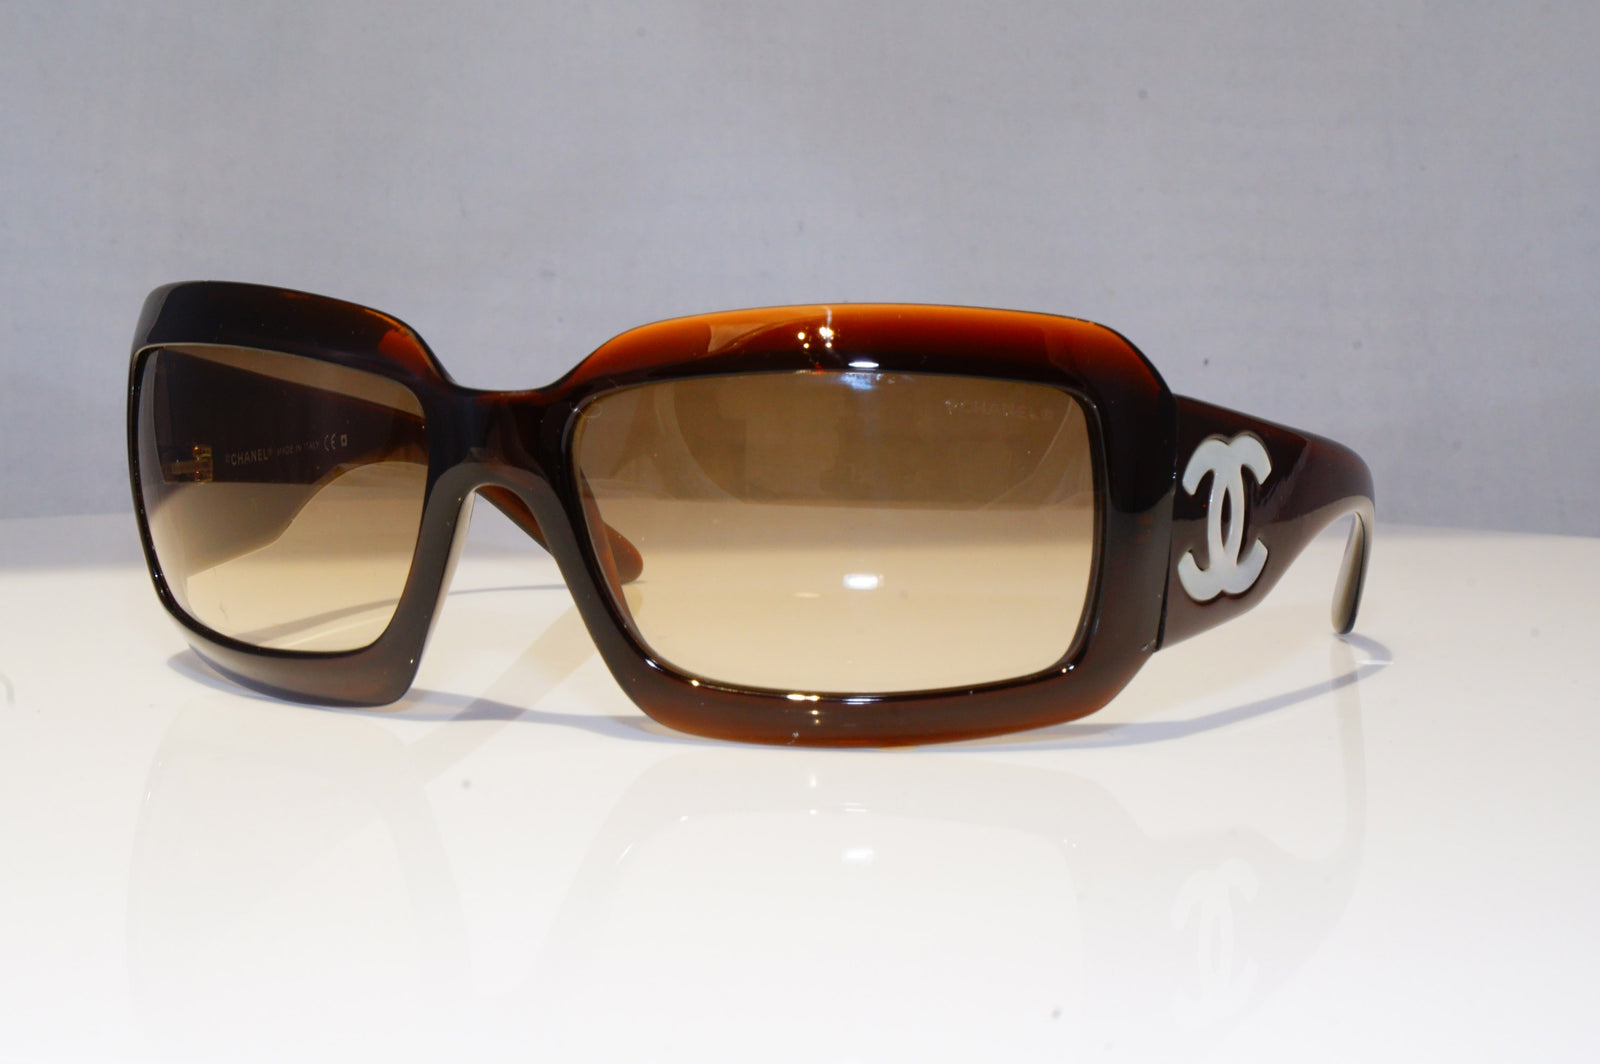 CHANEL Womens Designer Sunglasses Brown MOTHER OF PEARL 5076-H 538